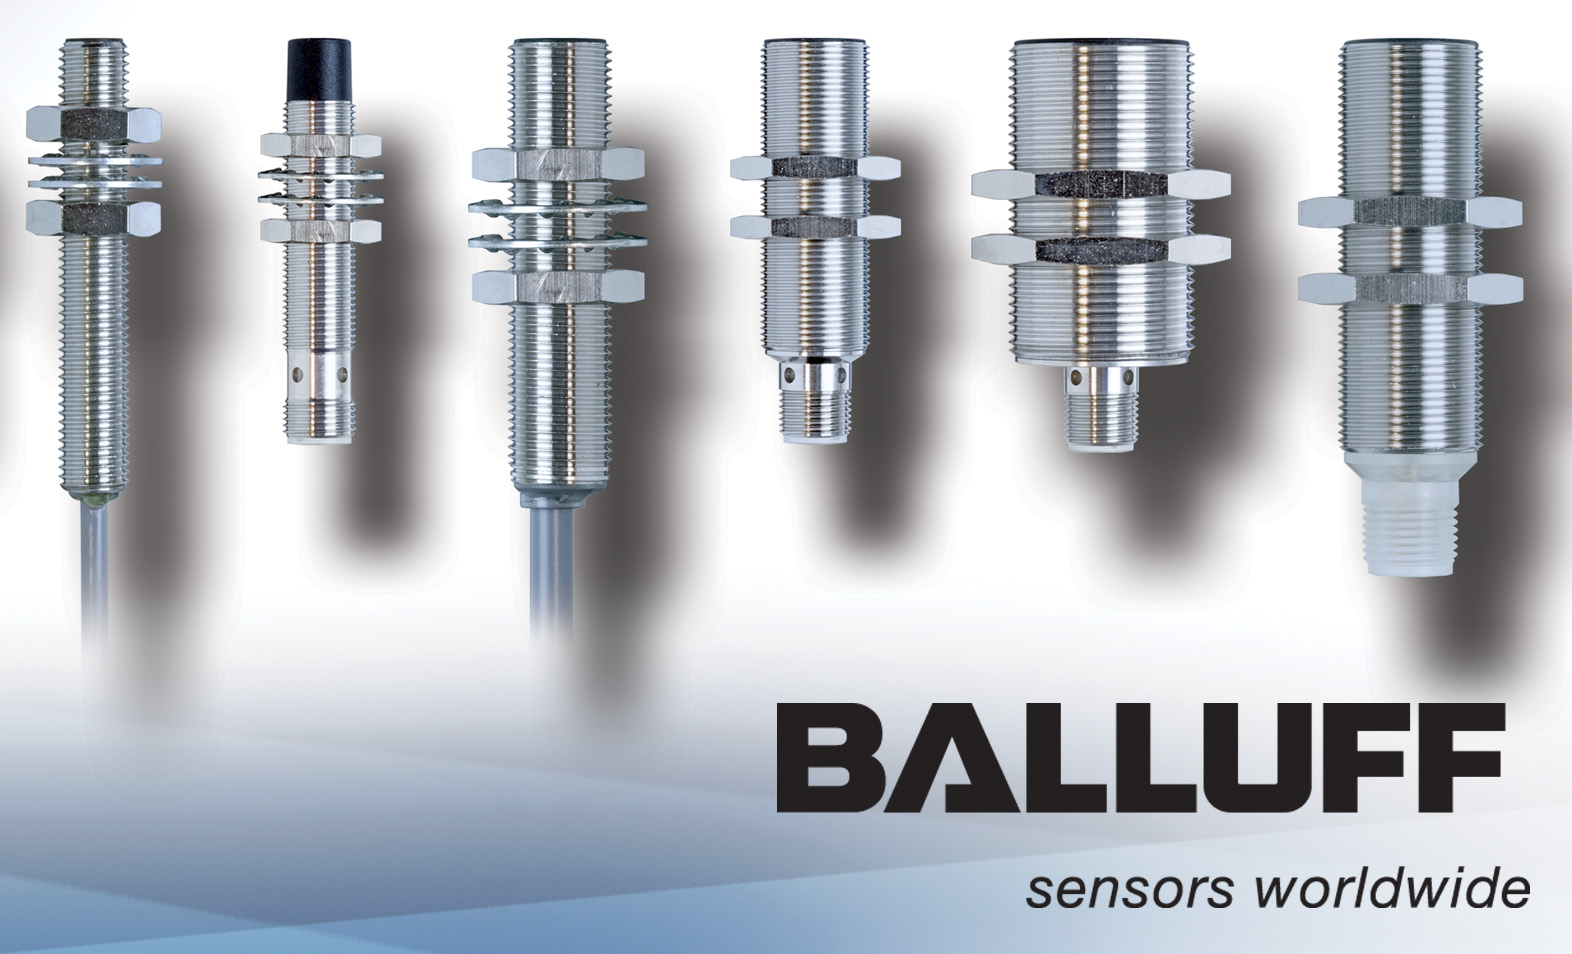 Balluff offers a wide variety of discrete sensing products, along with a complete offering of sensing, networking, and RFID products for Industrial Automation